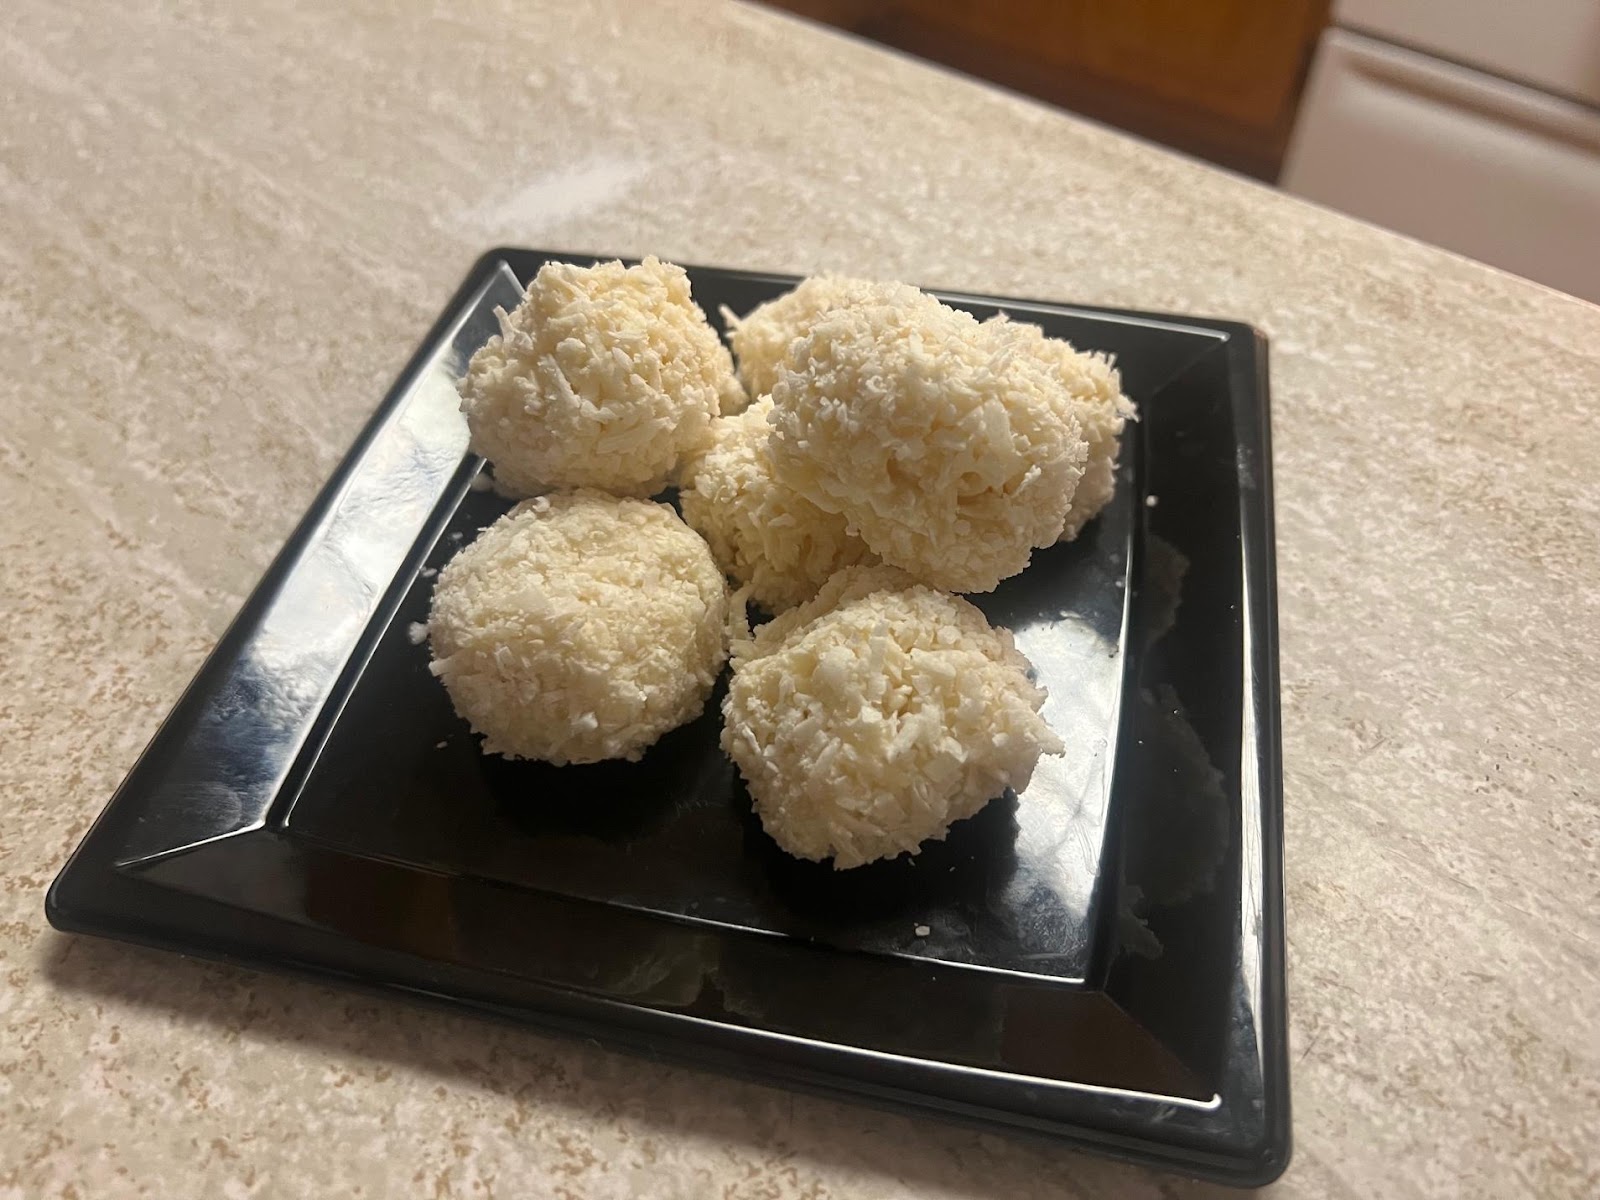 A plate of coconut balls on a counter

Description automatically generated